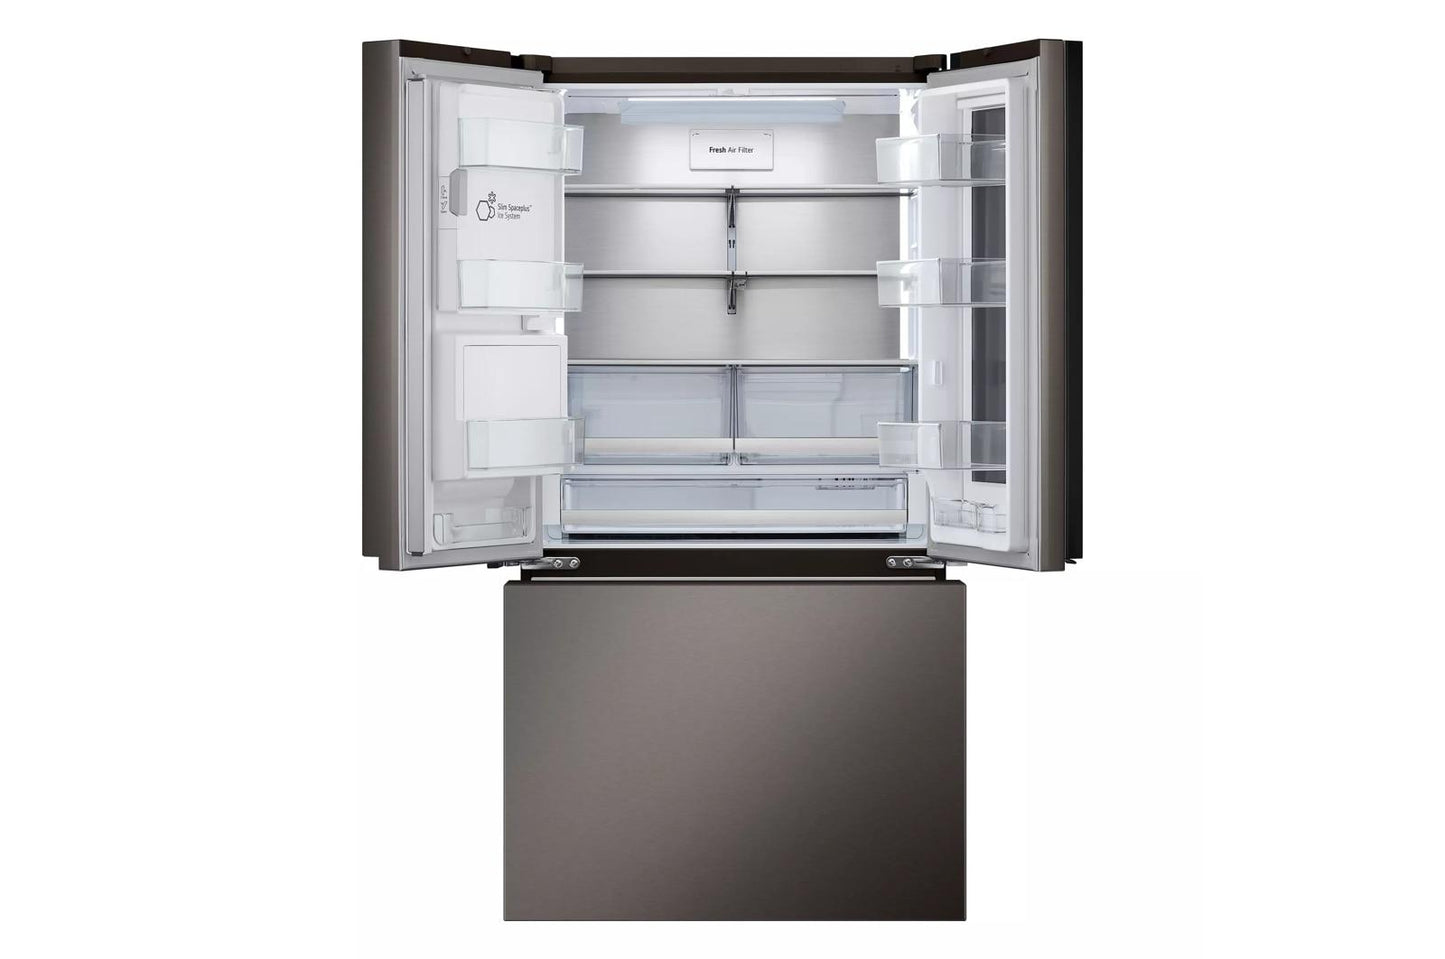 Lg LRYKS3106D 31 Cu. Ft. Smart Standard-Depth Max&#8482; French Door Refrigerator With Four Types Of Ice And Mirror Instaview®